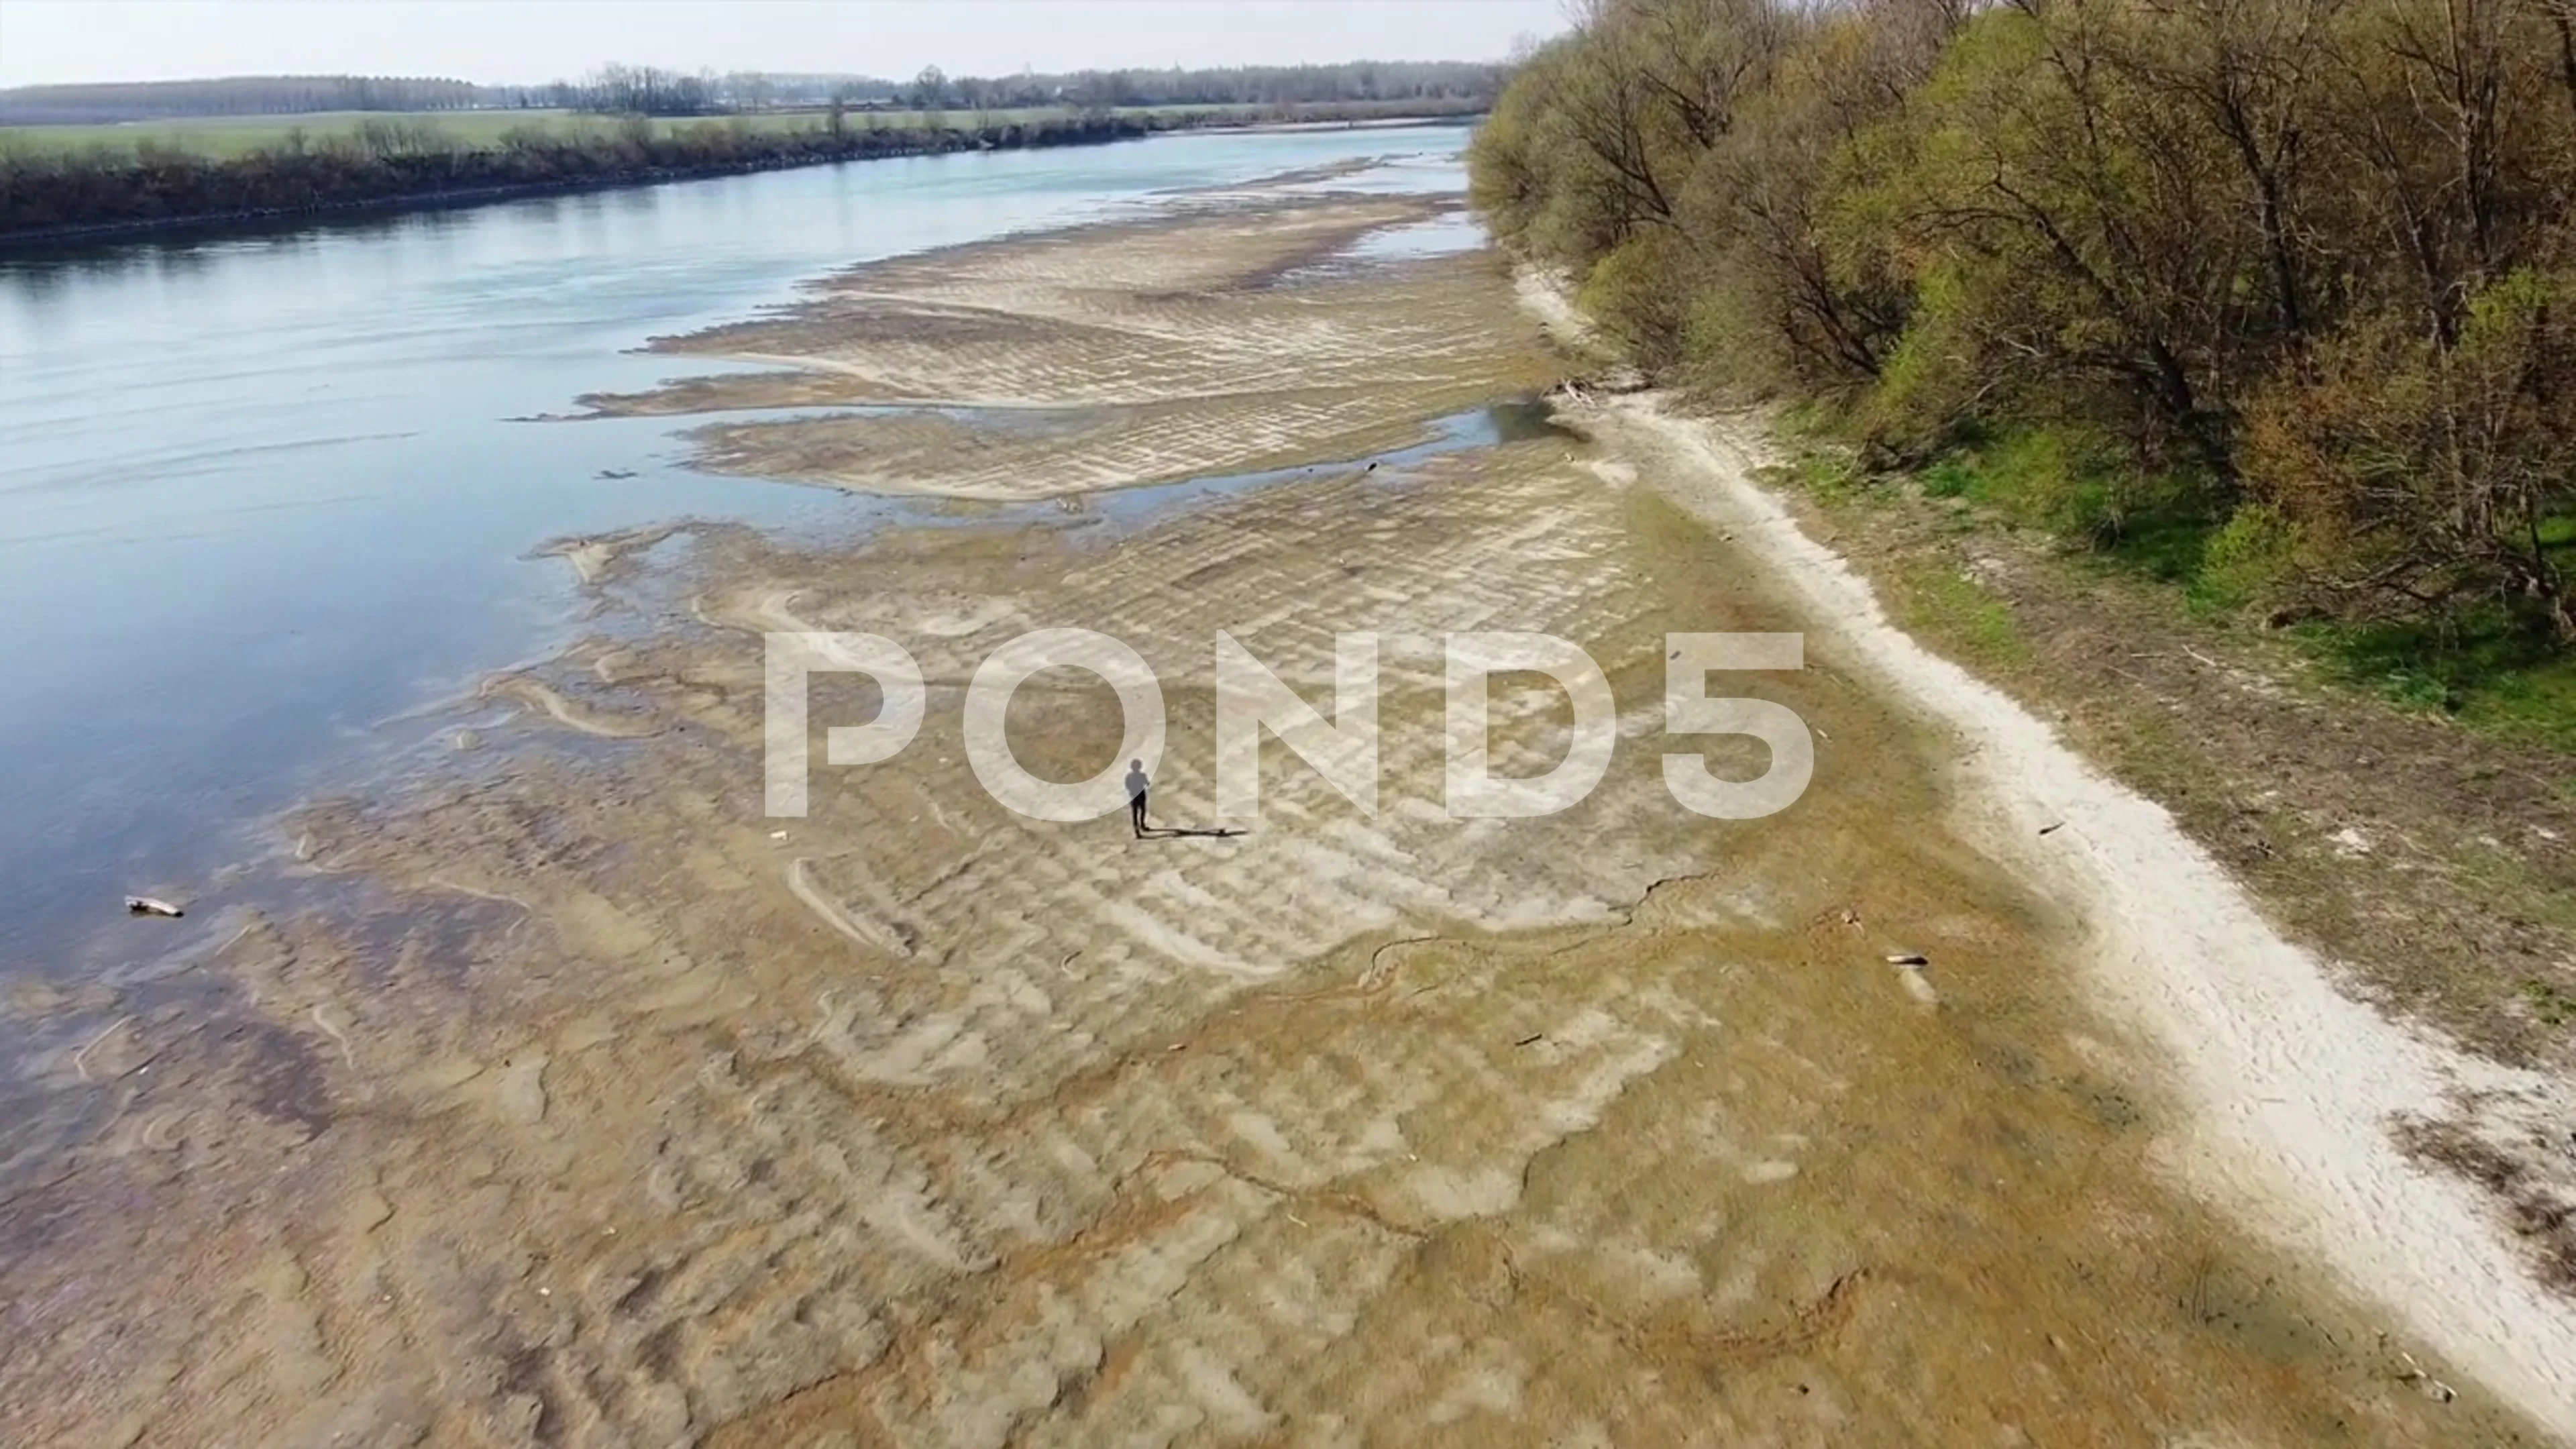 Italy - drought and aridity in the almost waterless Po river with large  expanses of sand and